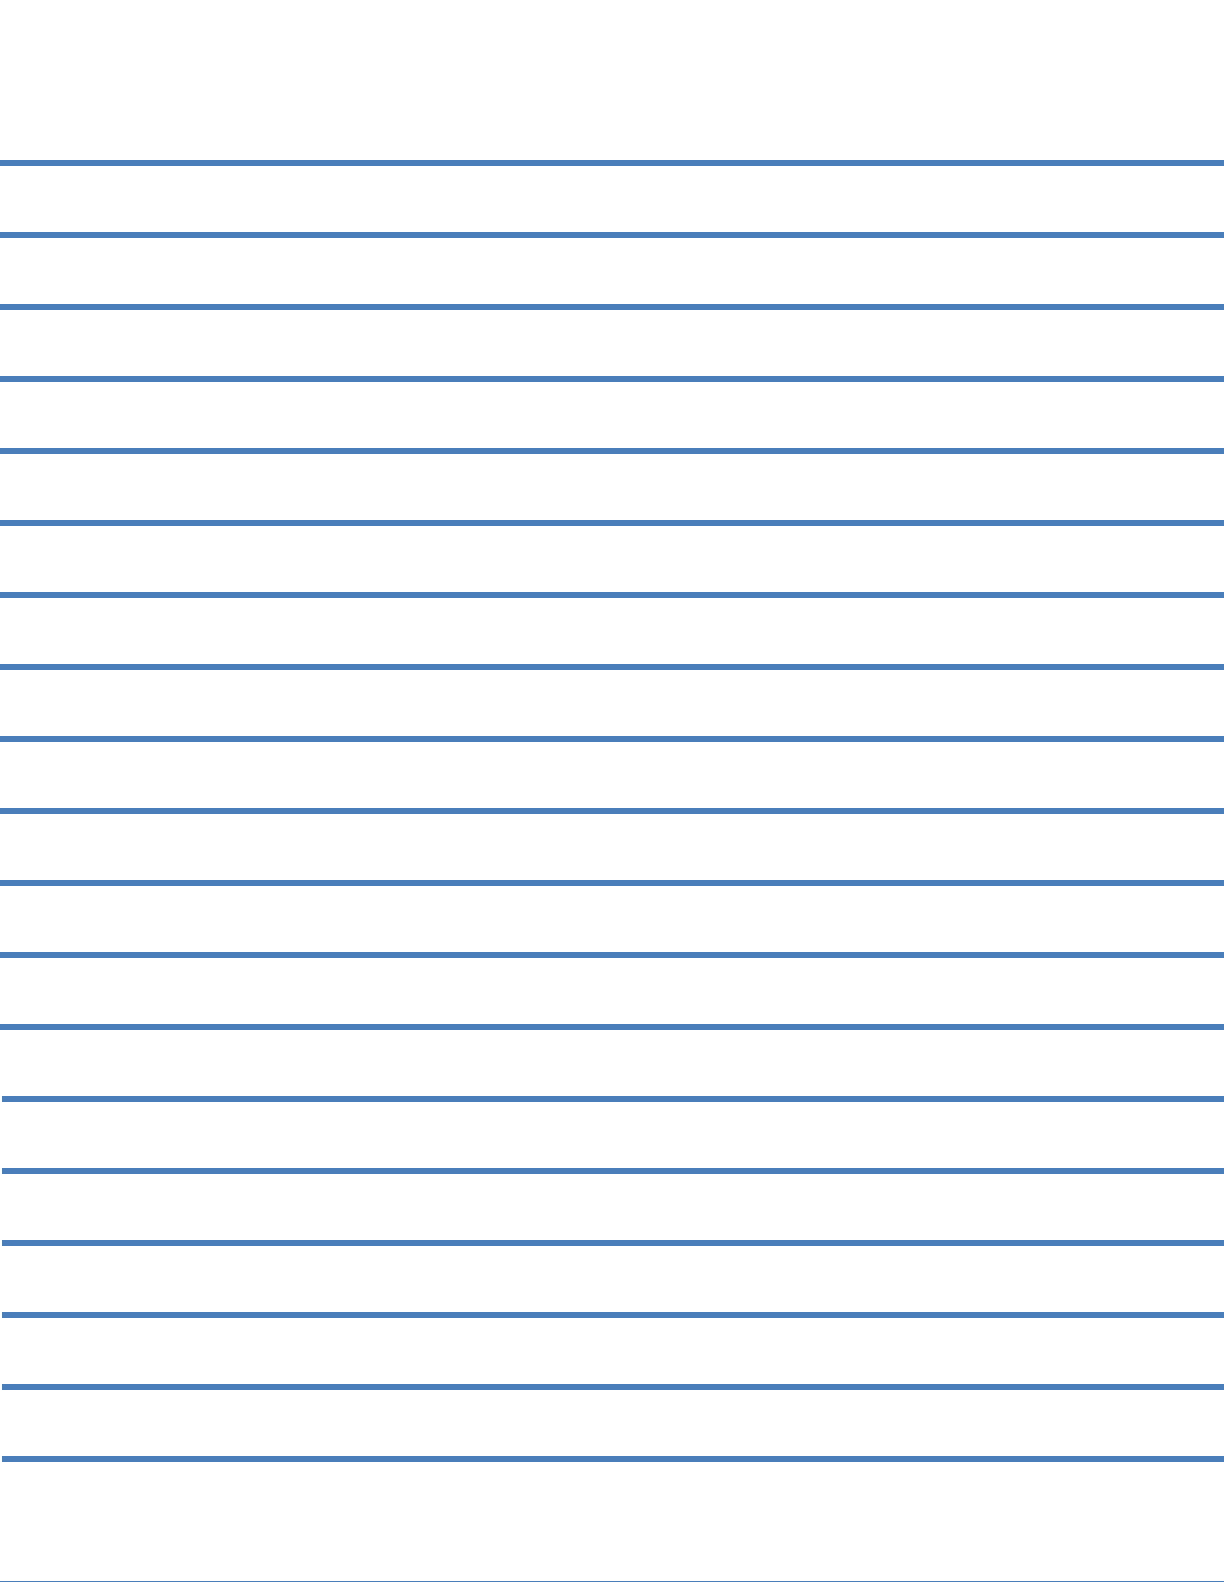 Low Vision Writing Paper 1 2 Inch Blue Lines Free Download